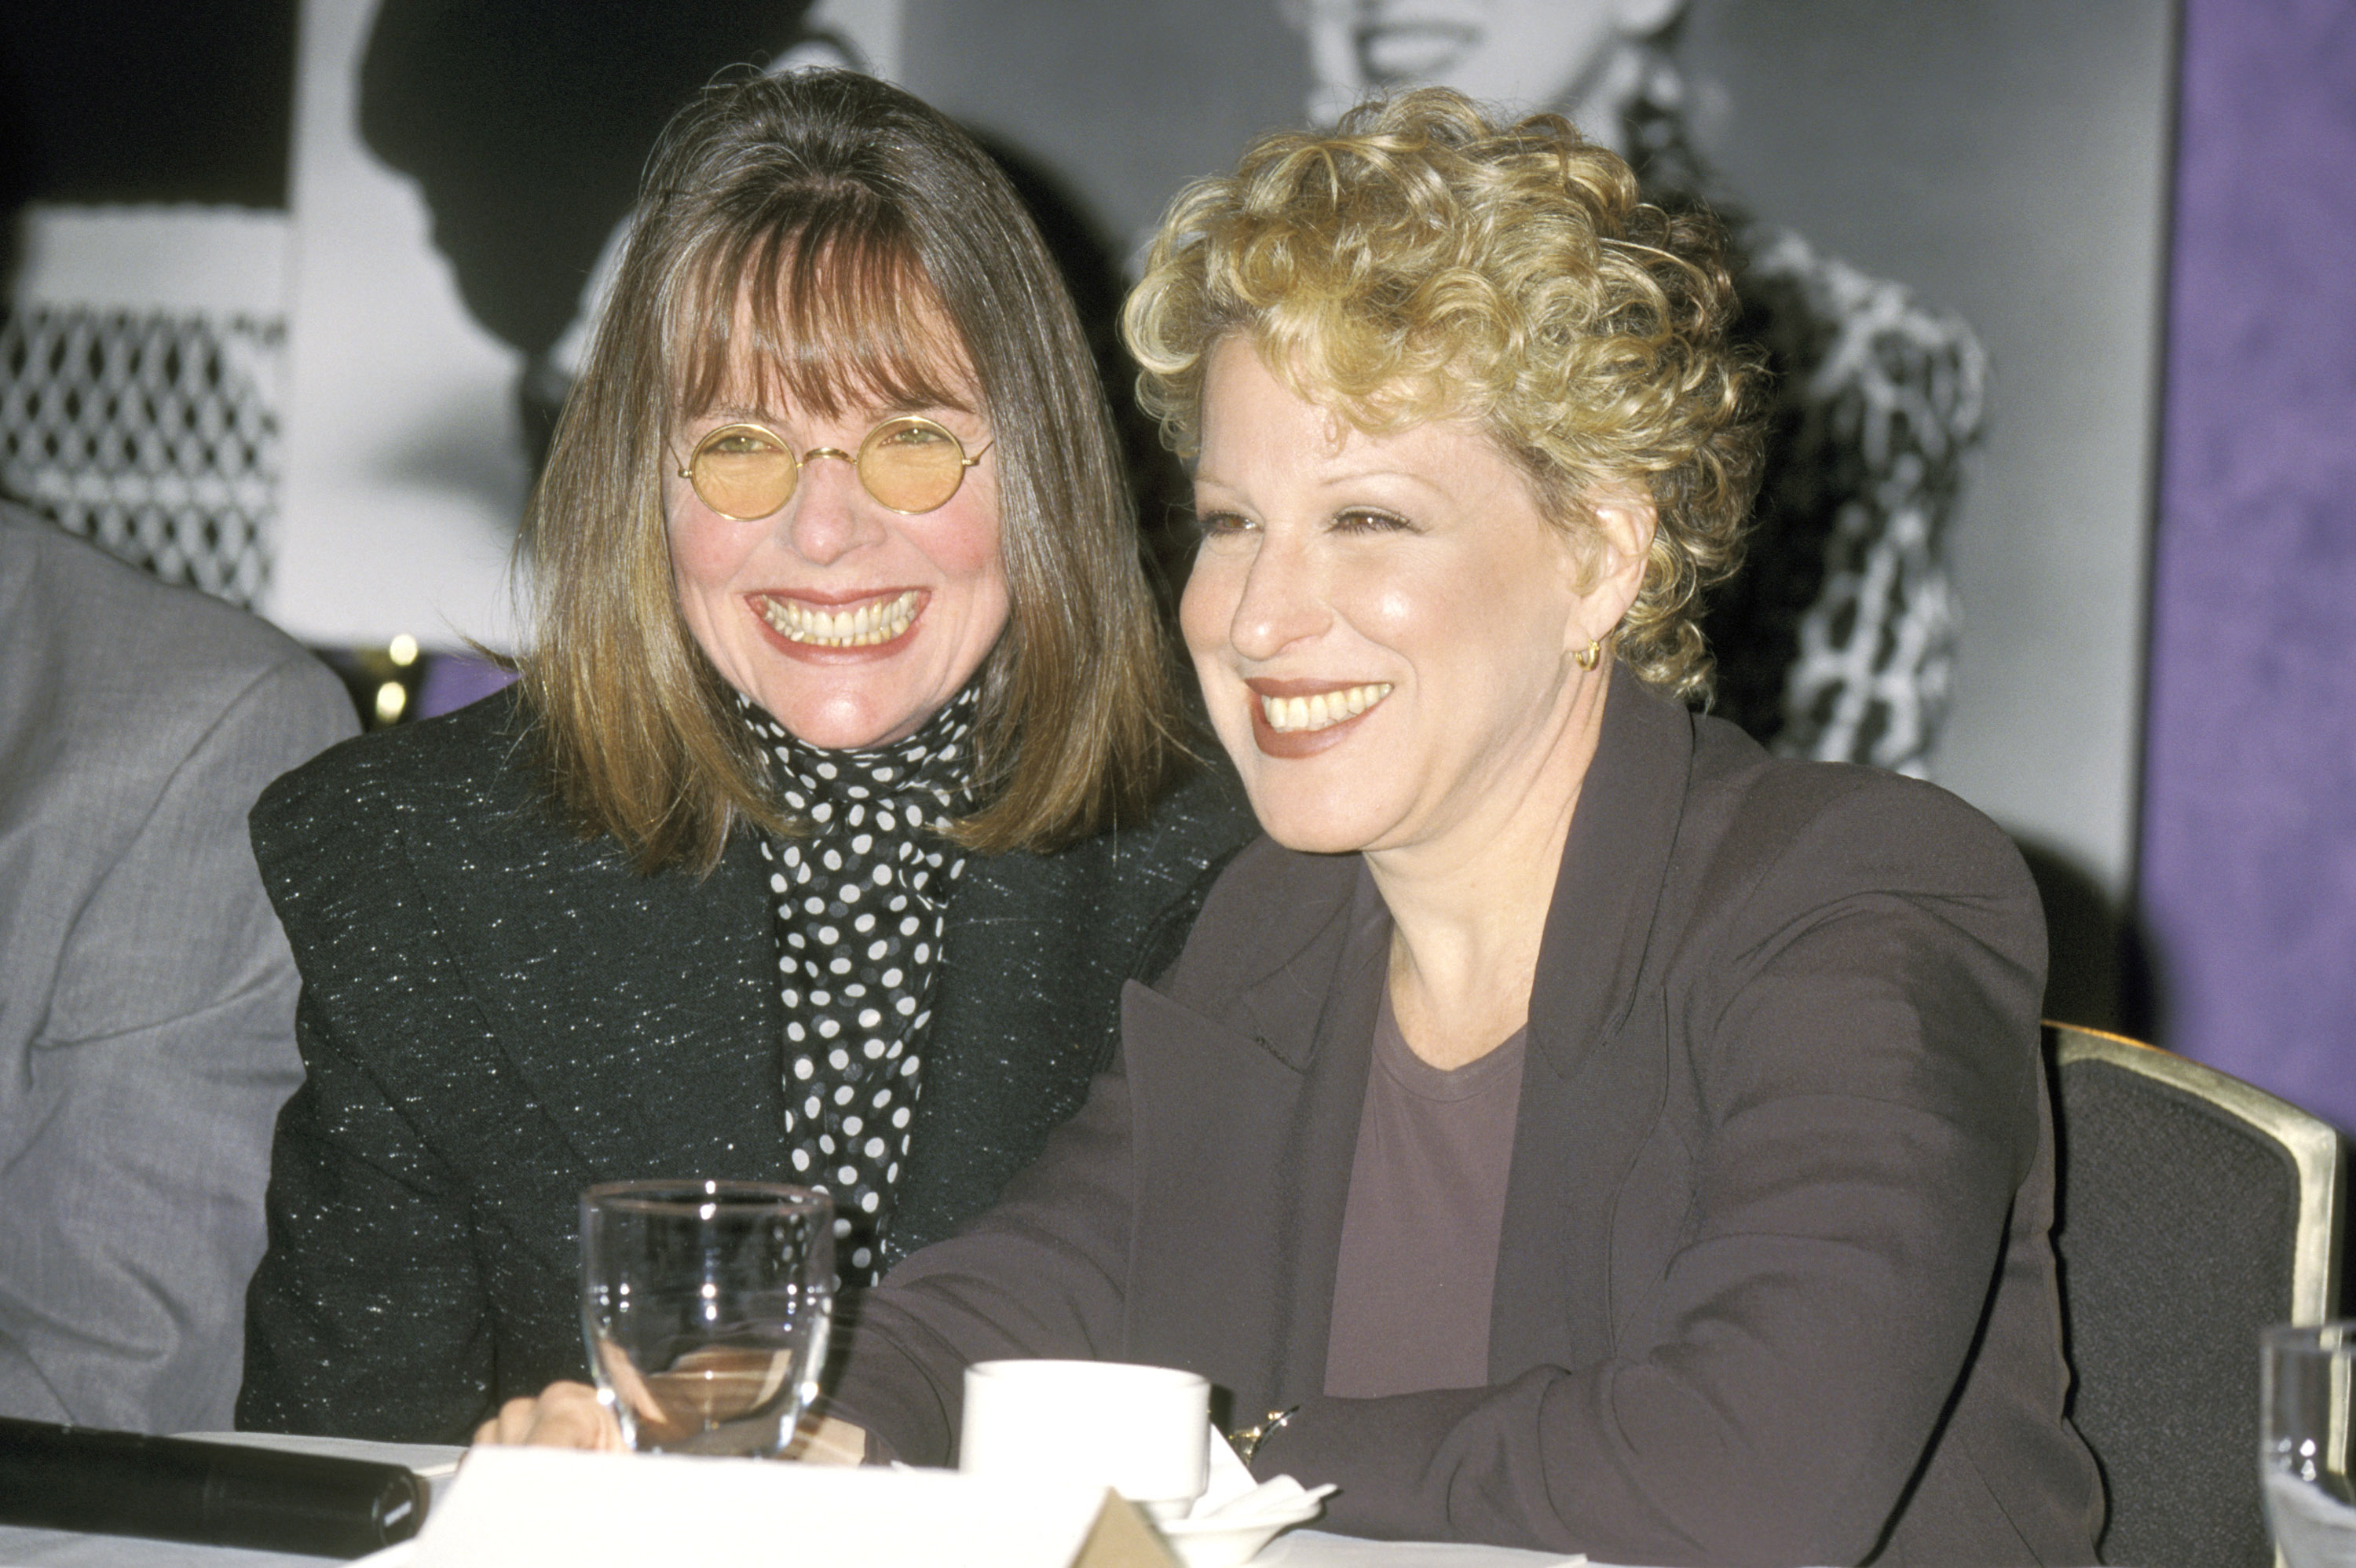 Diane Keaton and Bette Midler during the 1997 Women In Film Crystal Awards at Century Plaza Hotel, in Century City, California | Source: Getty Images